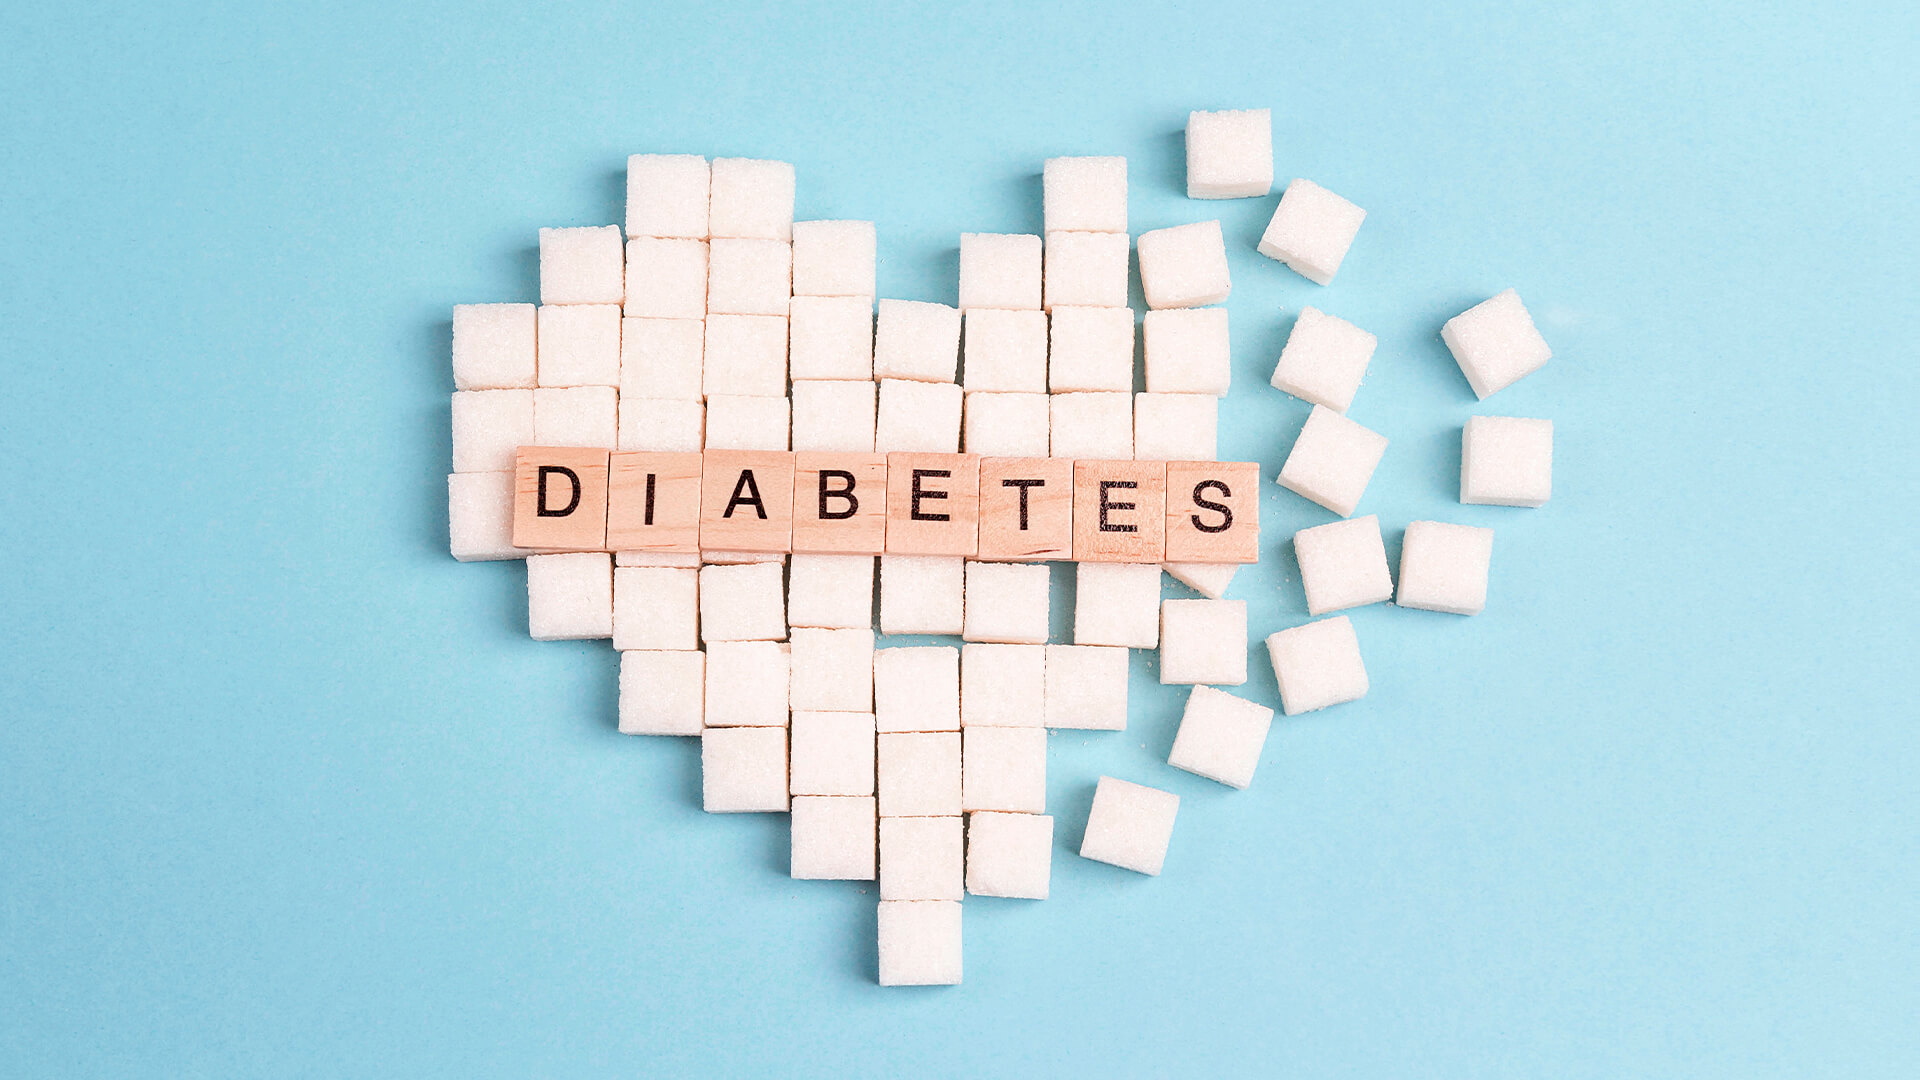 Eradicating Diabetes by 2050 – Mission (Im-)Possible?